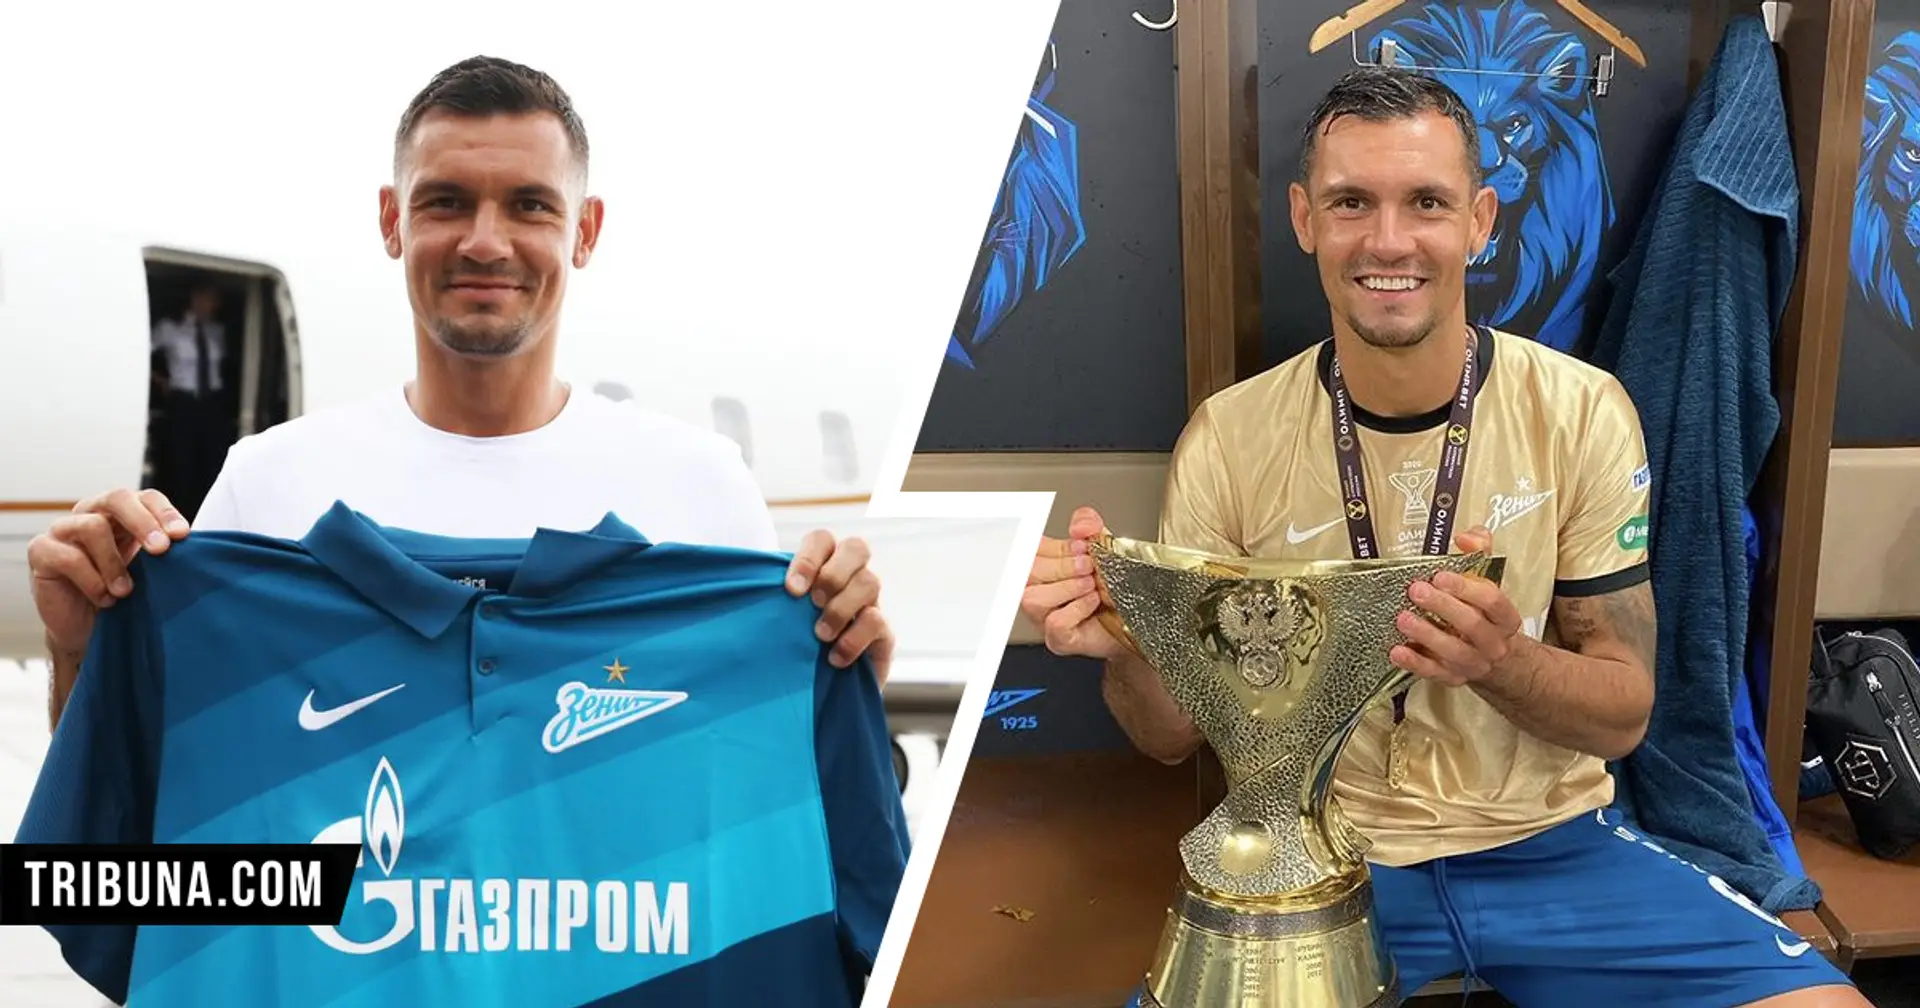 Dejan Lovren plays first game for Zenit - and wins first trophy